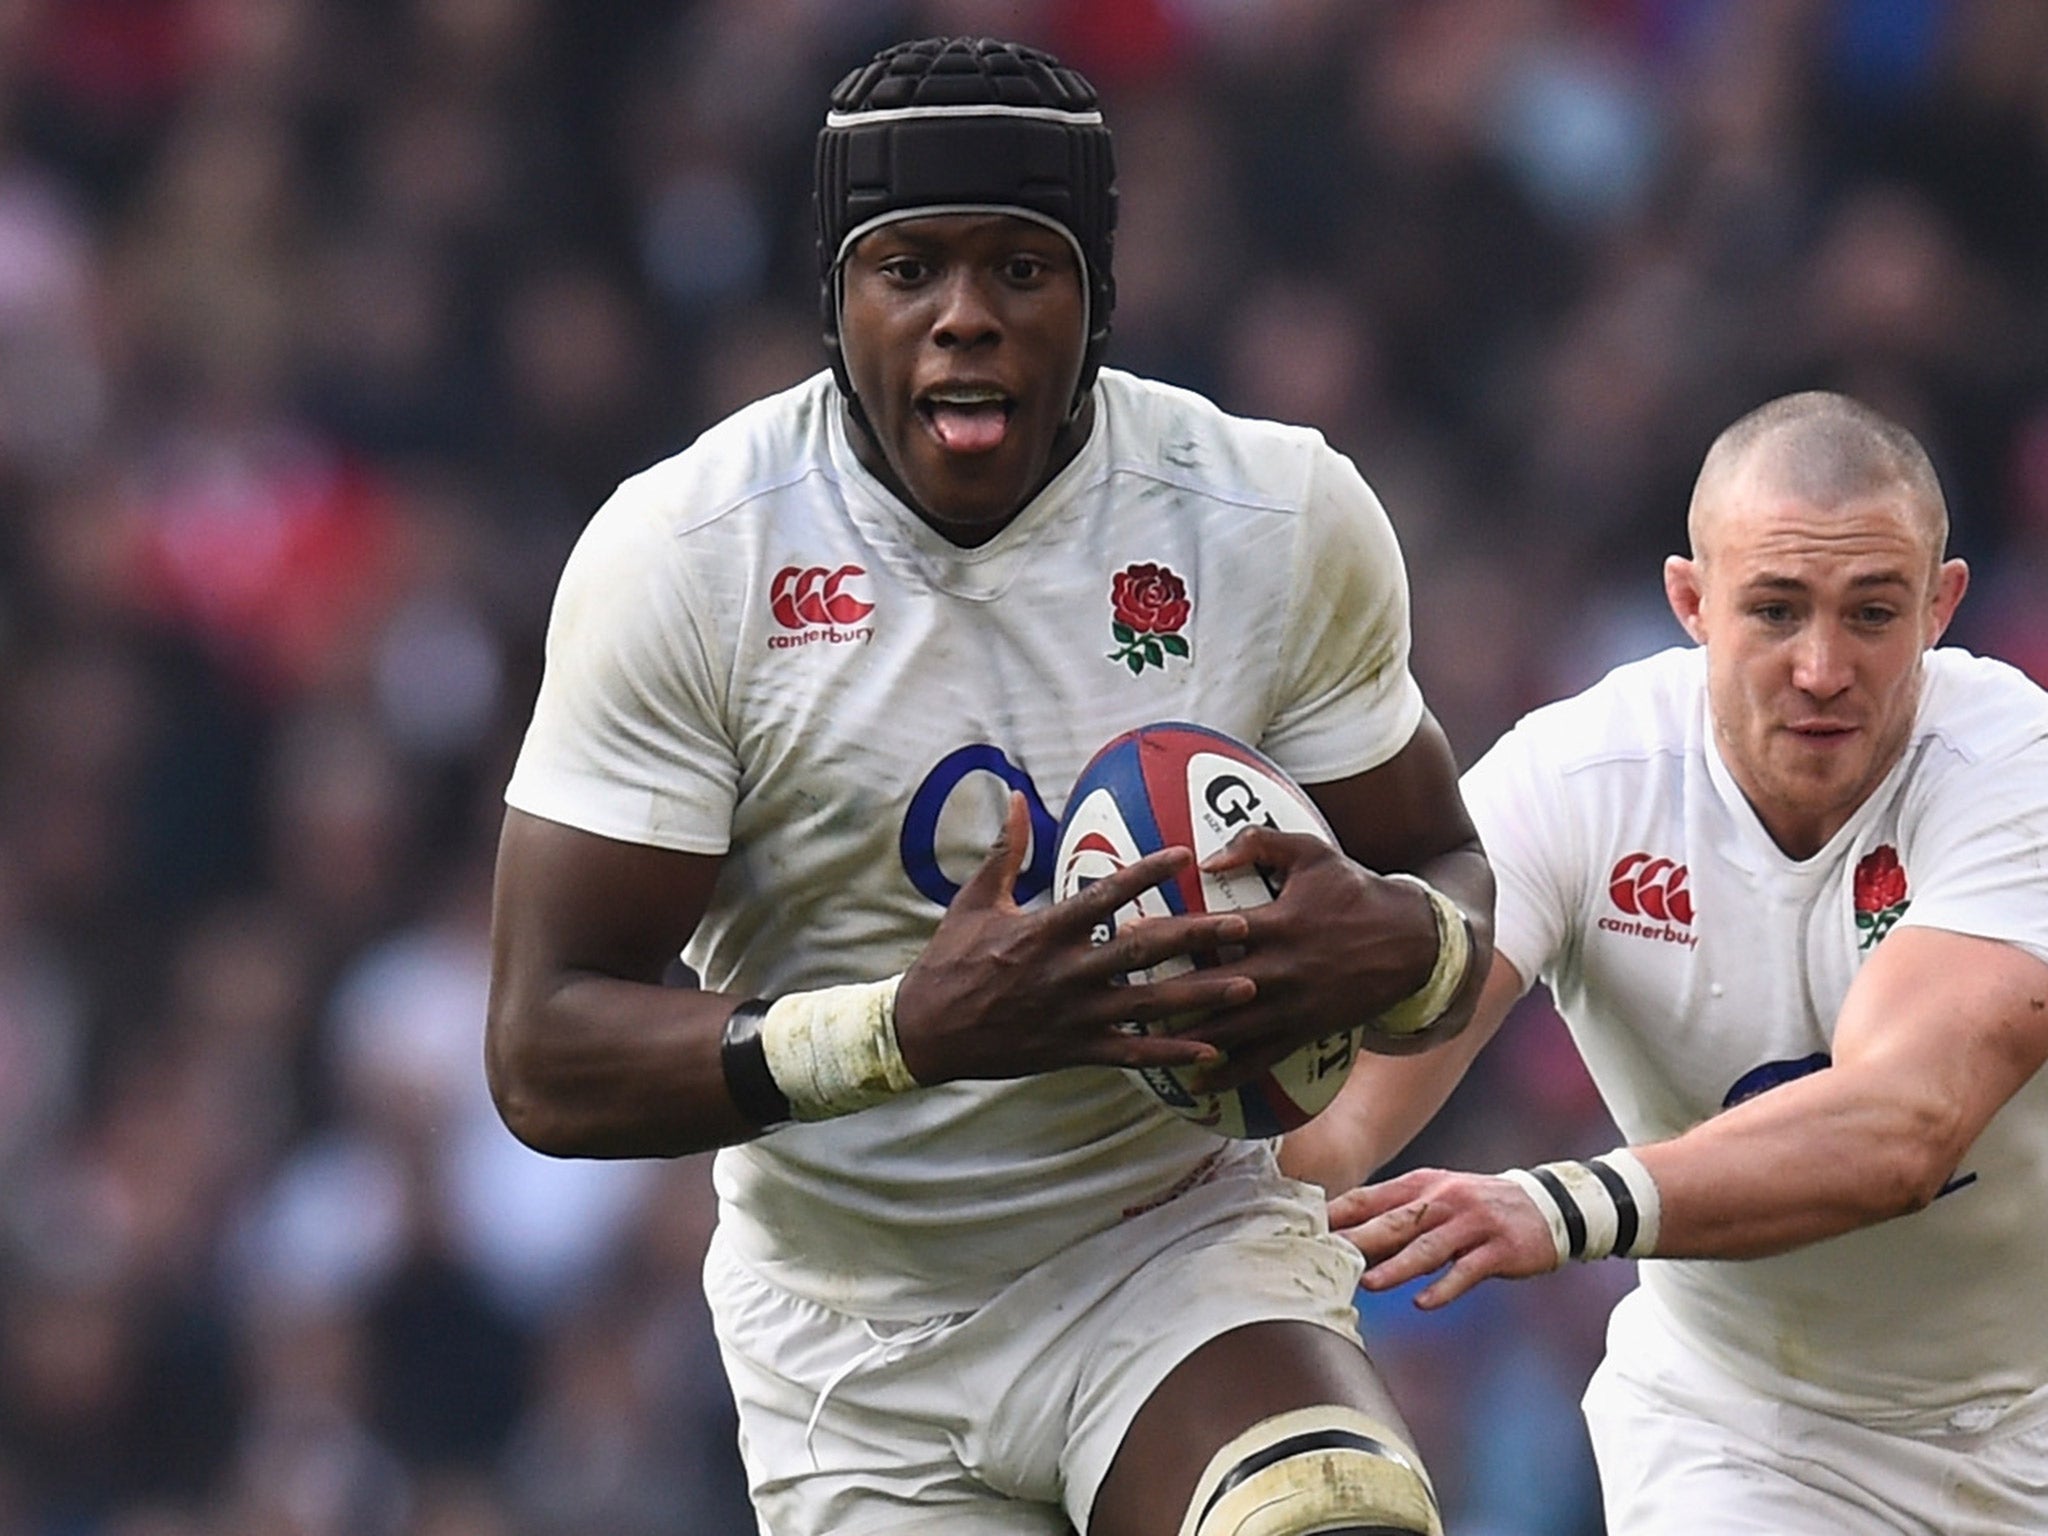 England lock Maro Itoje has the potential to be a future England captain, says Nick Easter